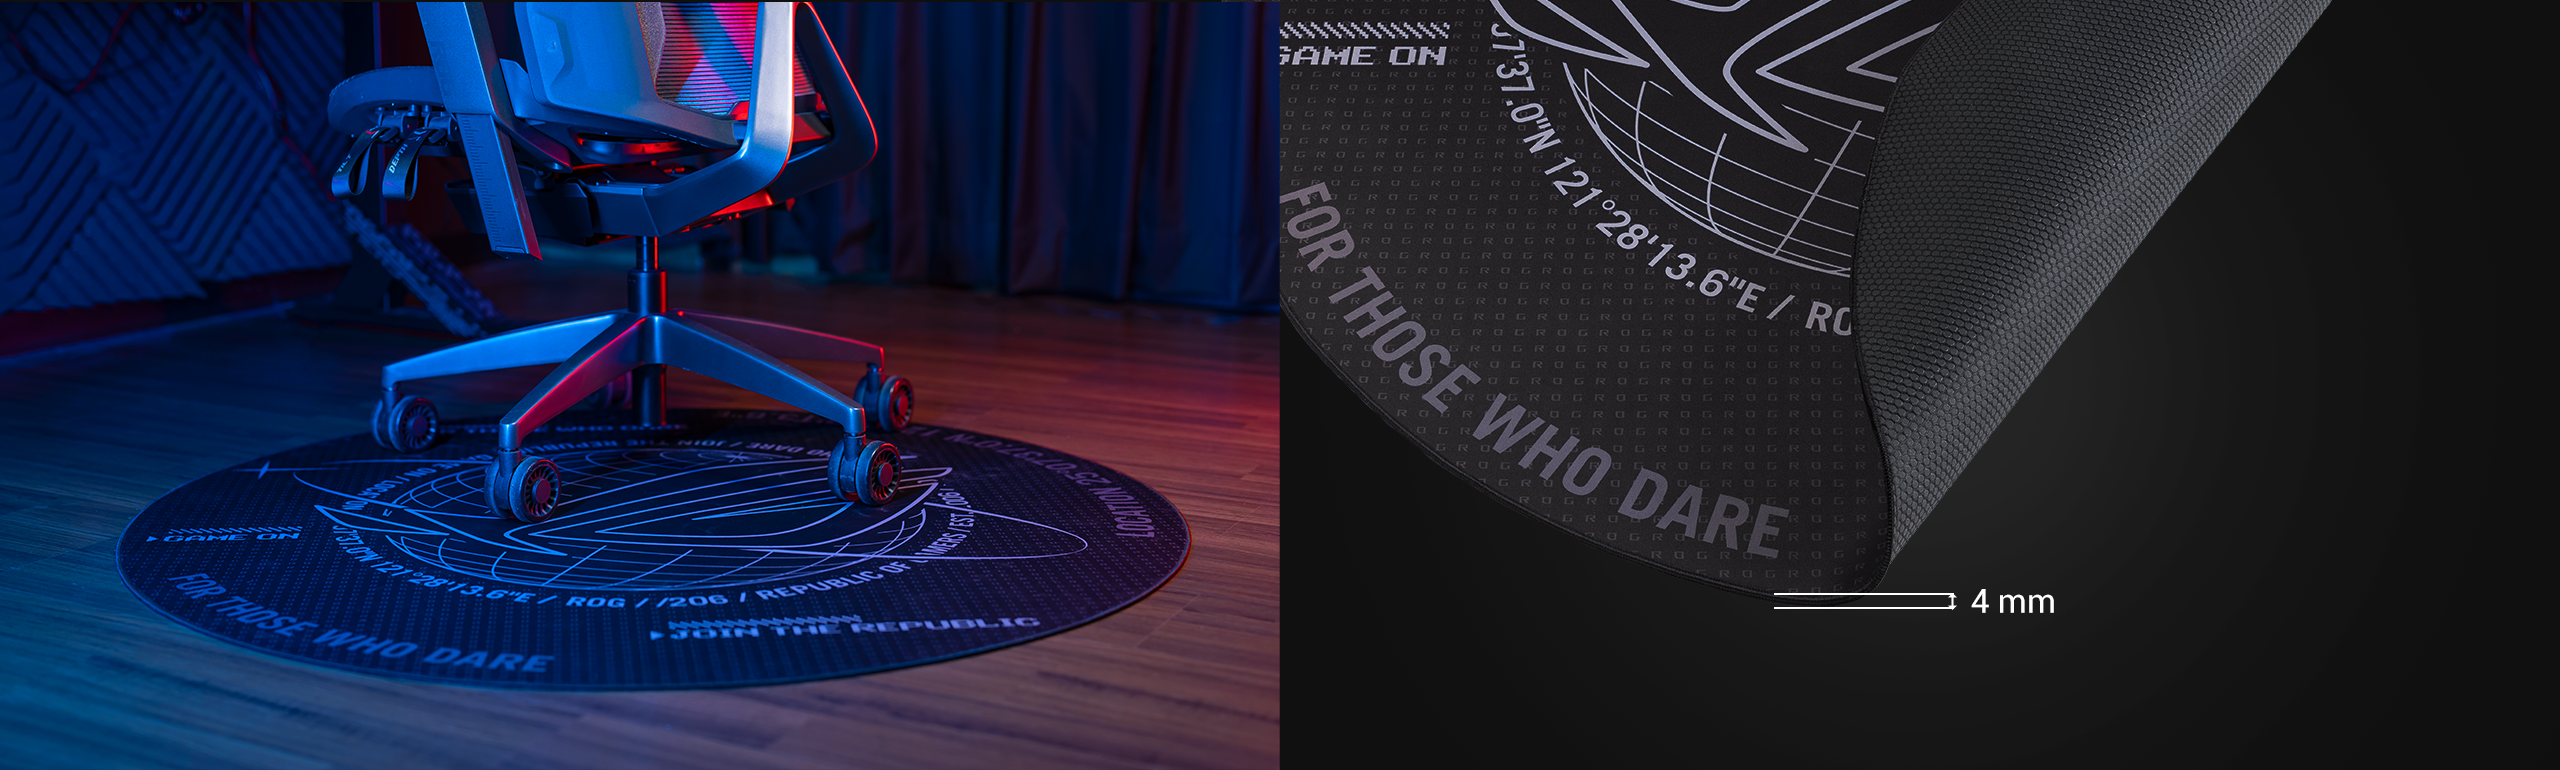 The ROG Cosmic Mat is placed on the floor under the ROG Destrier Ergo Gaming Chair. The photo is a reverse-folded ROG Cosmic Mat, which describe the ROG Cosmic Mat has a 4 millimeter thickness.